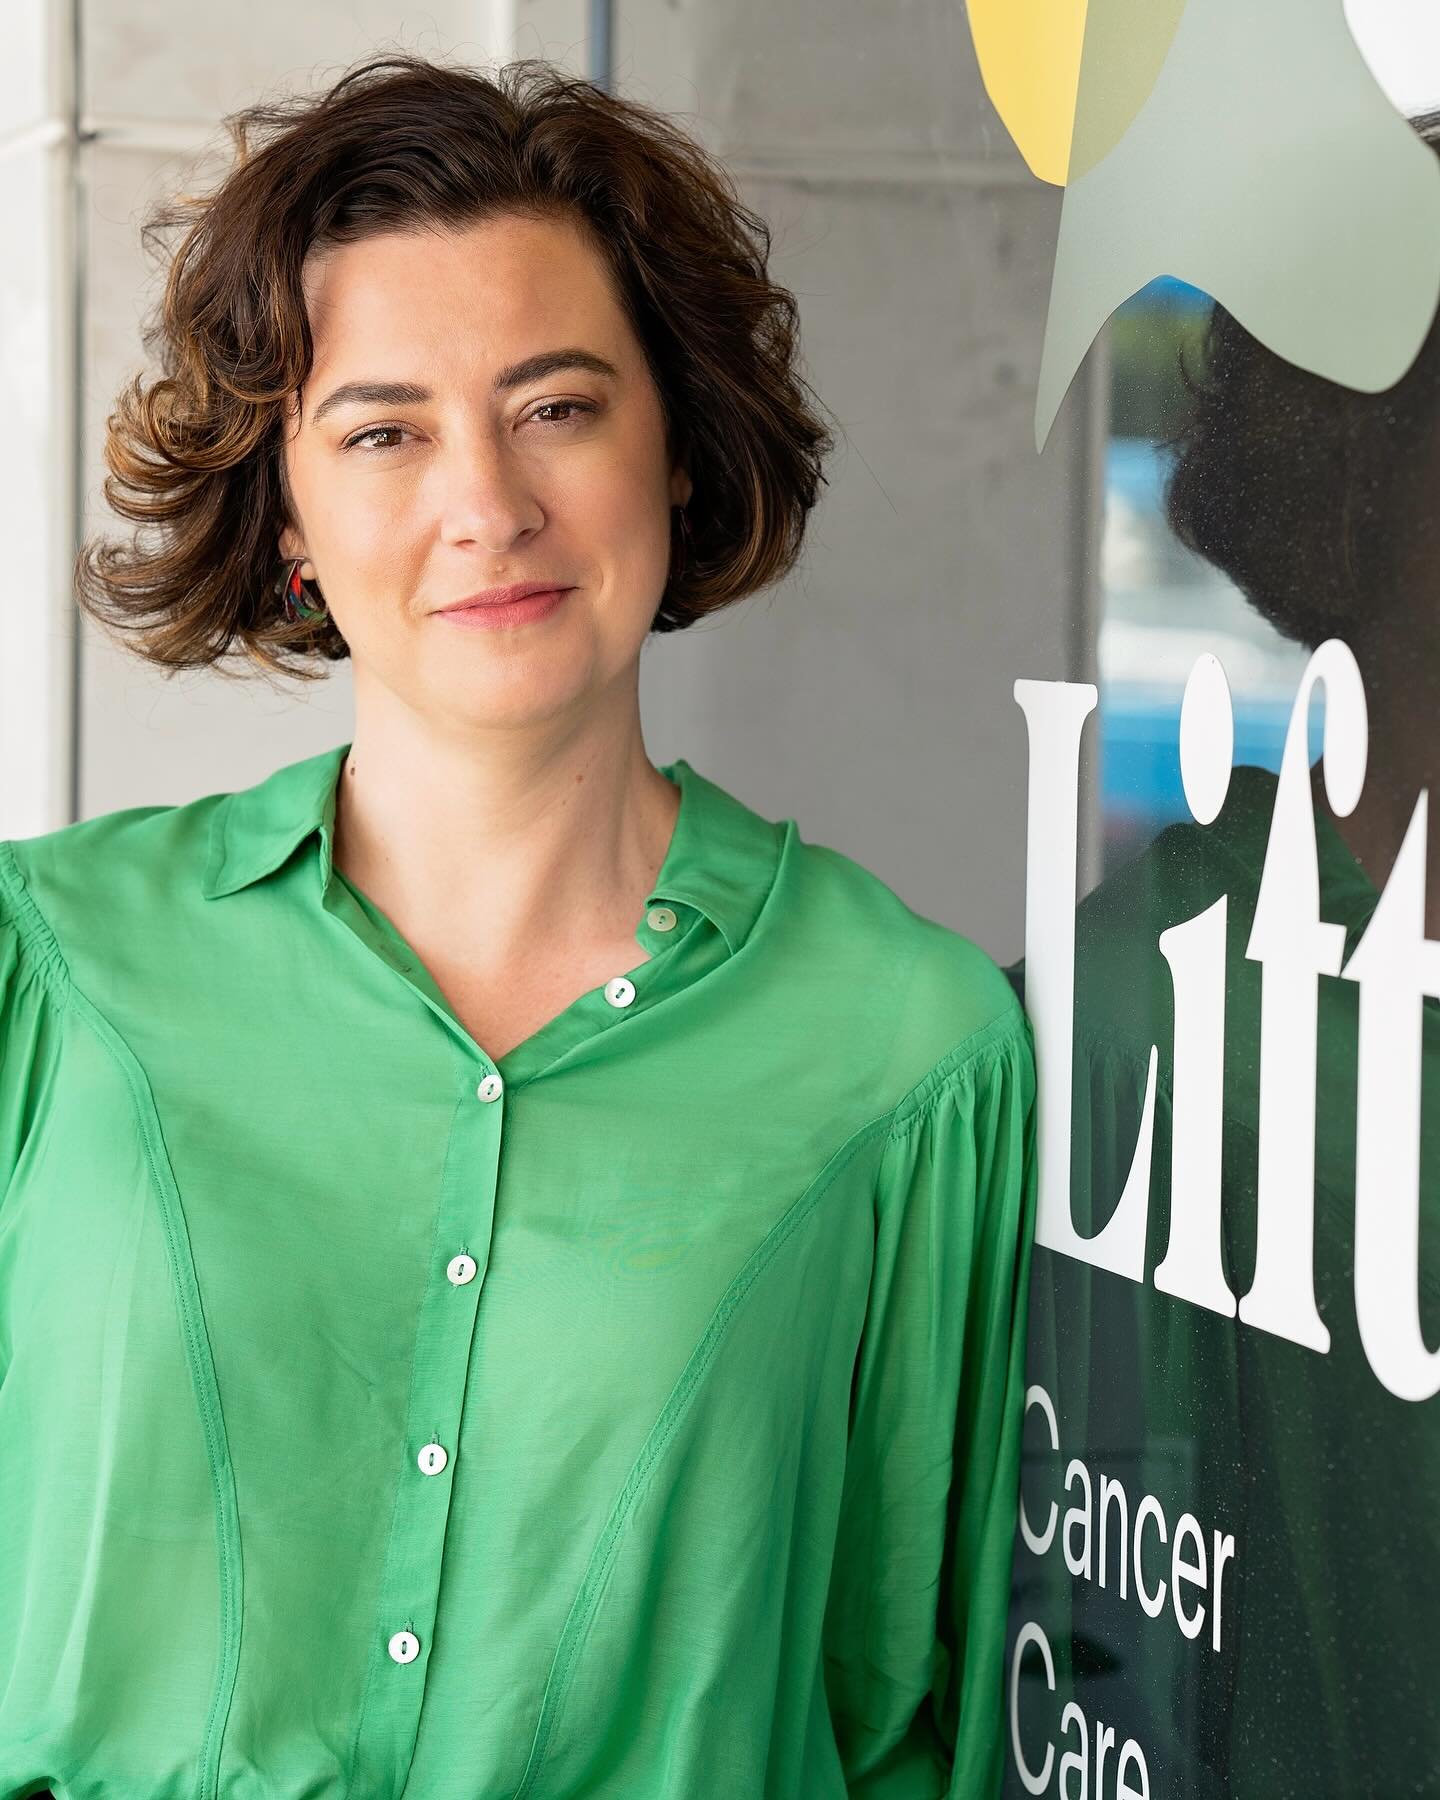 We are thrilled that Lauren Whiting, Founder and CEO of Lift Cancer Care Services and trained Oncology Physiotherapist, has been invited to host a Breast Cancer Network Australia webcast. She will take viewers through the many benefits of getting reg